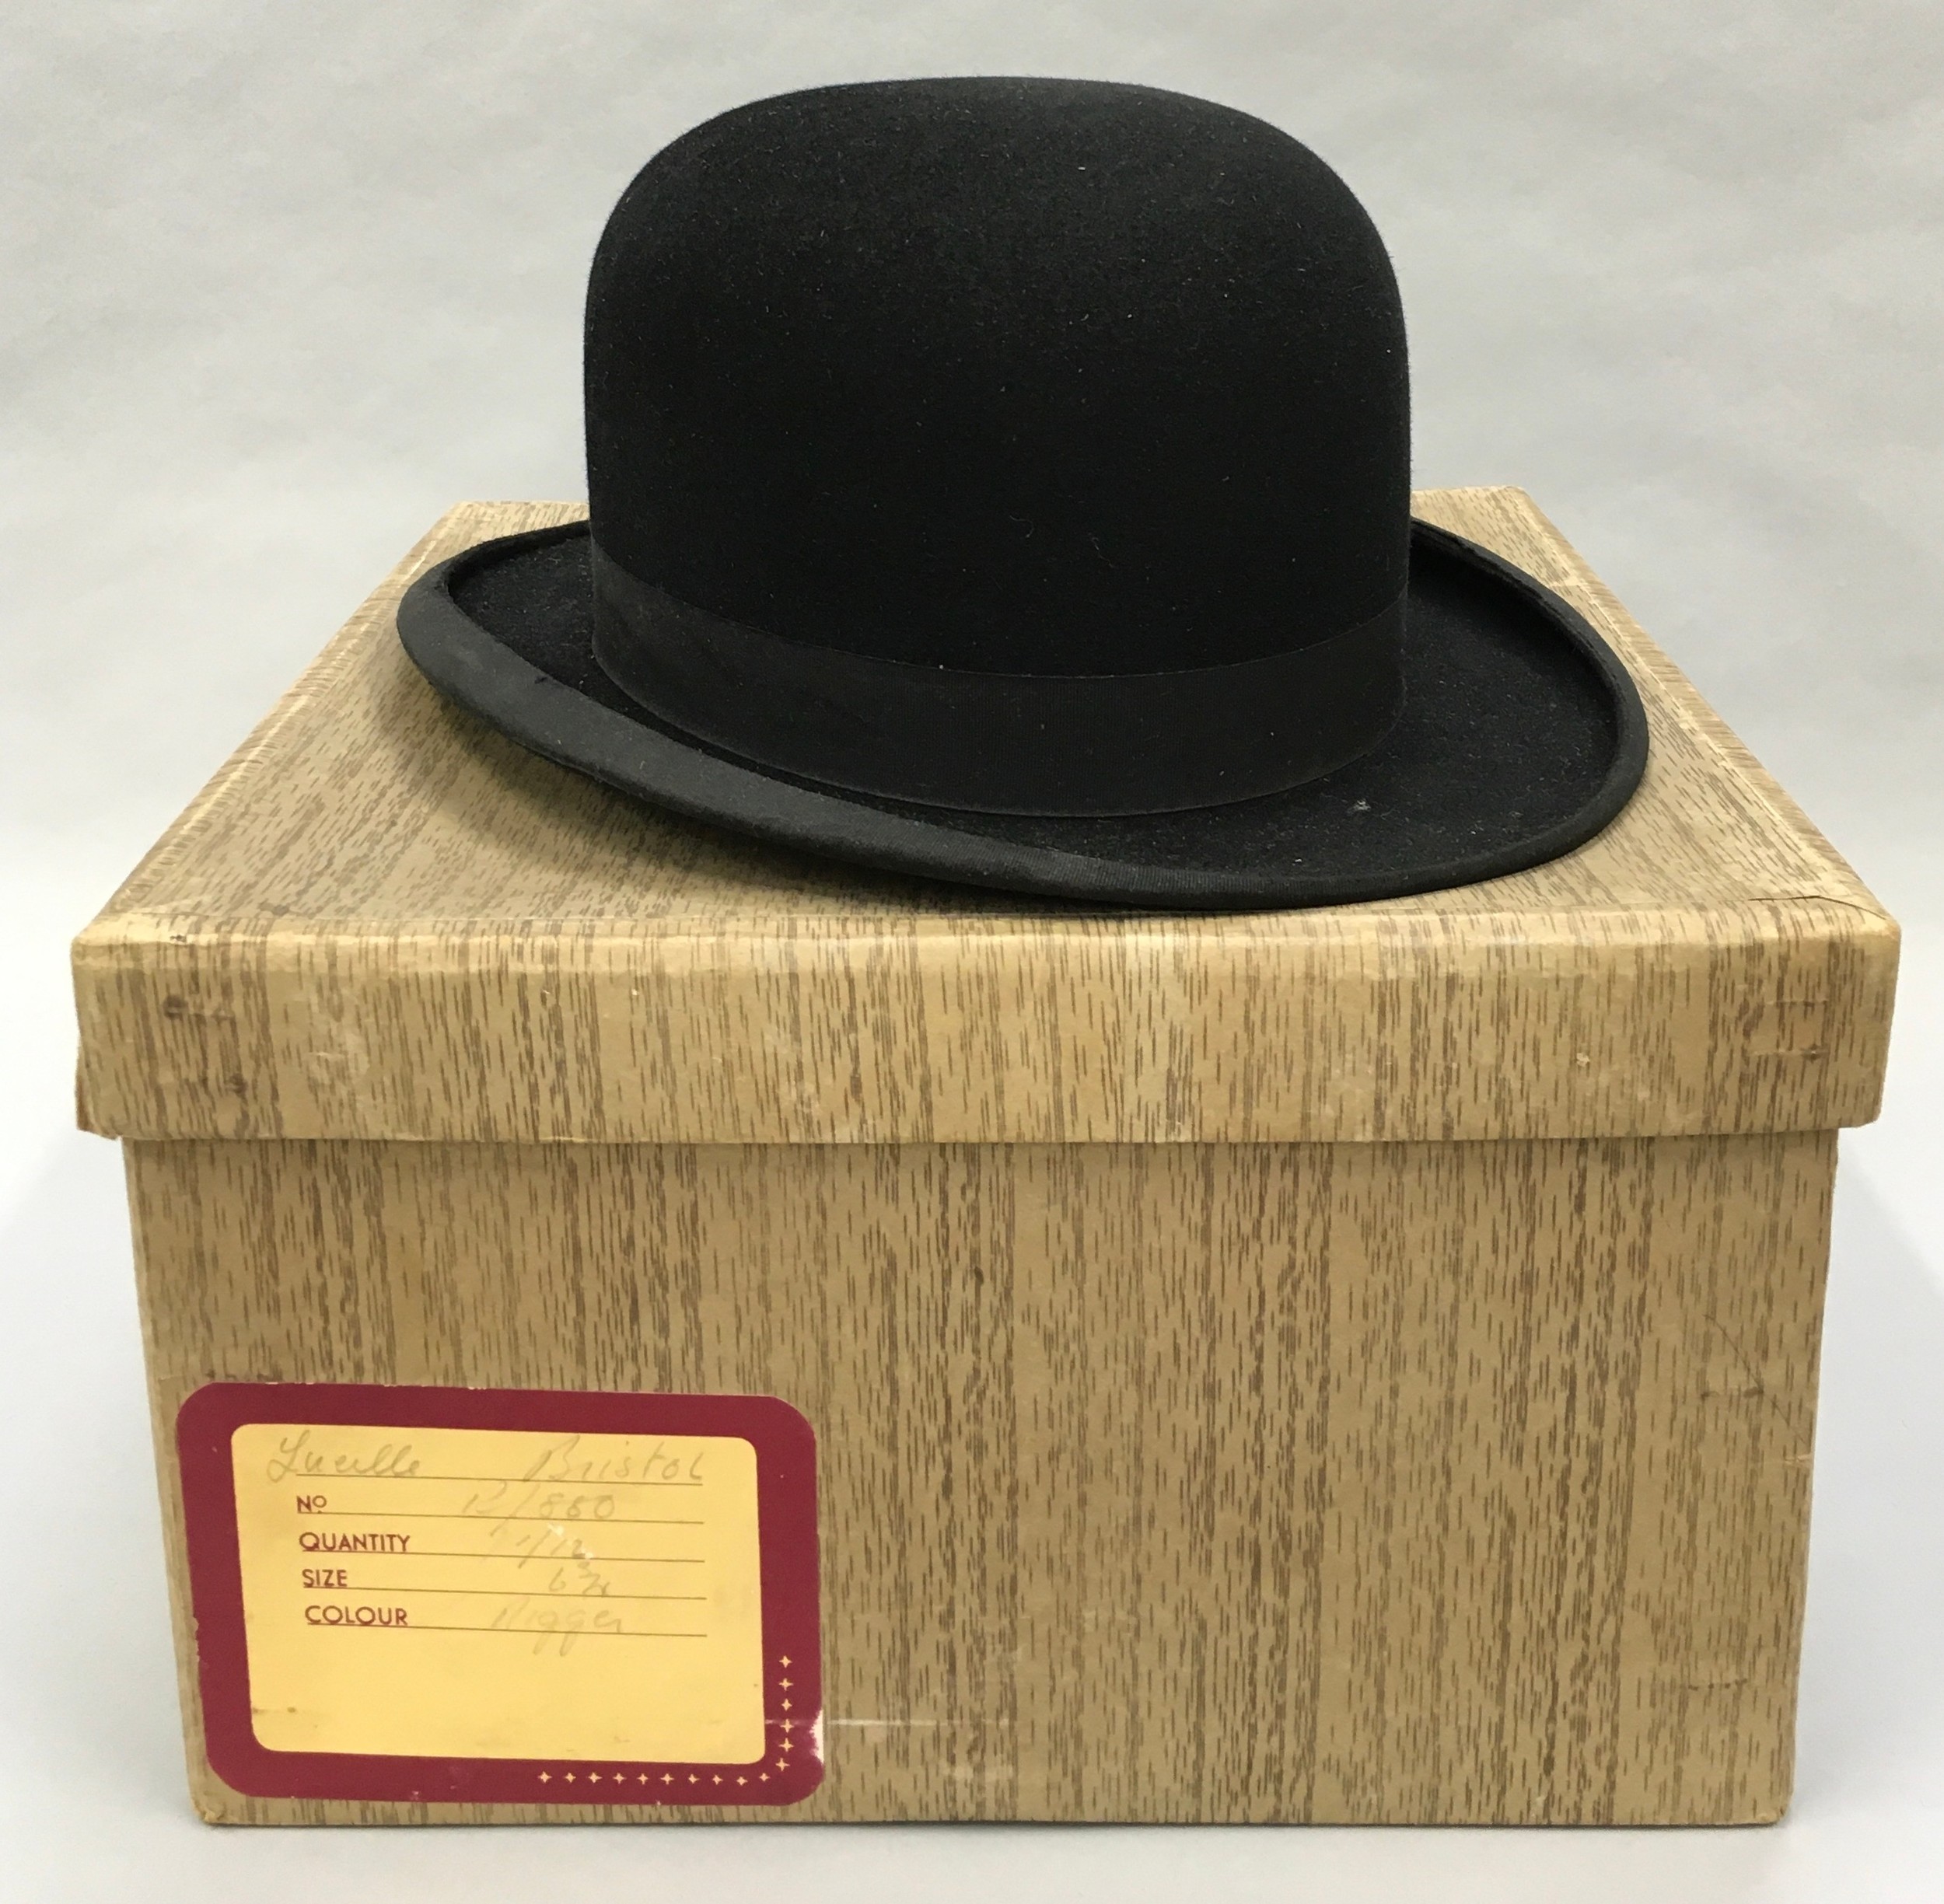 H.J. Whyatt "The Vellum" bowler hat with box marked "Moores, British Made".